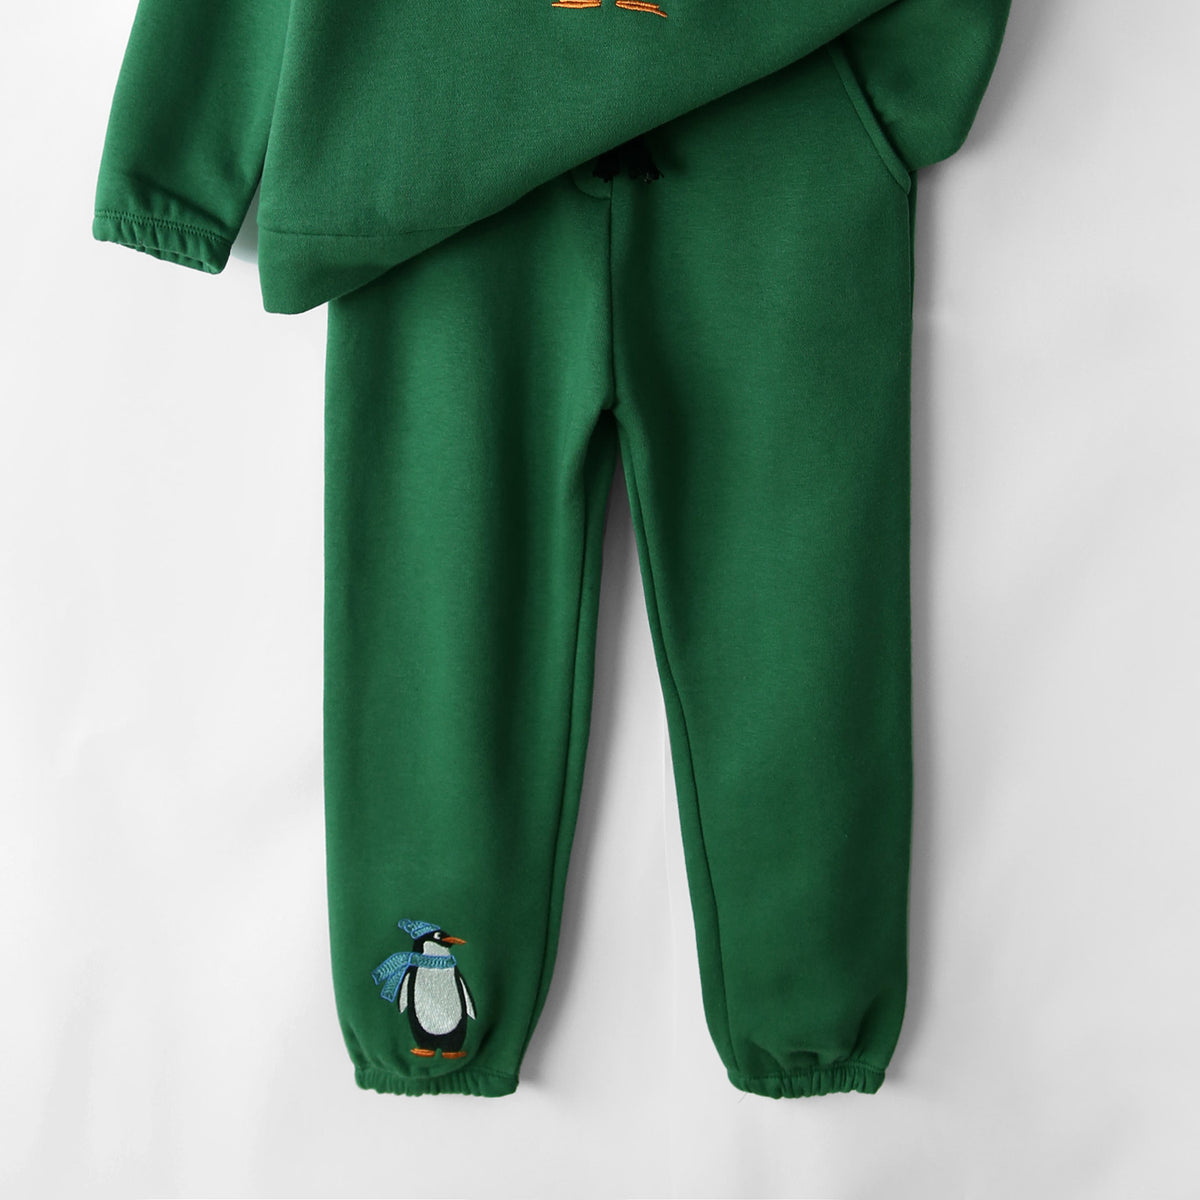 Premium Quality Embroidered Fleece Green Trouser For Girls